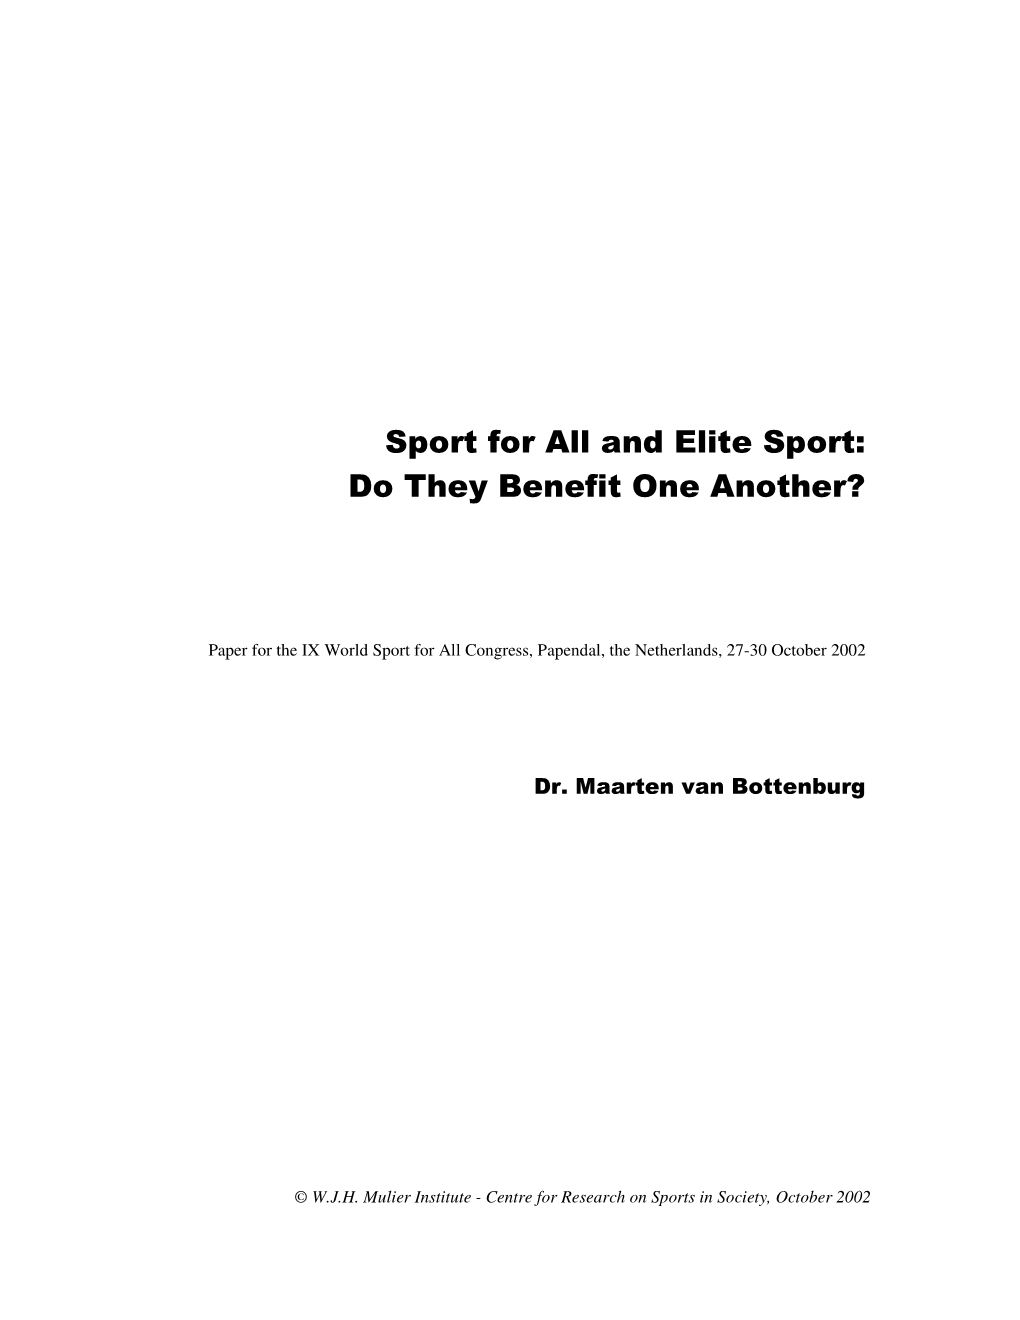 Sport for All and Elite Sport: Do They Benefit One Another?